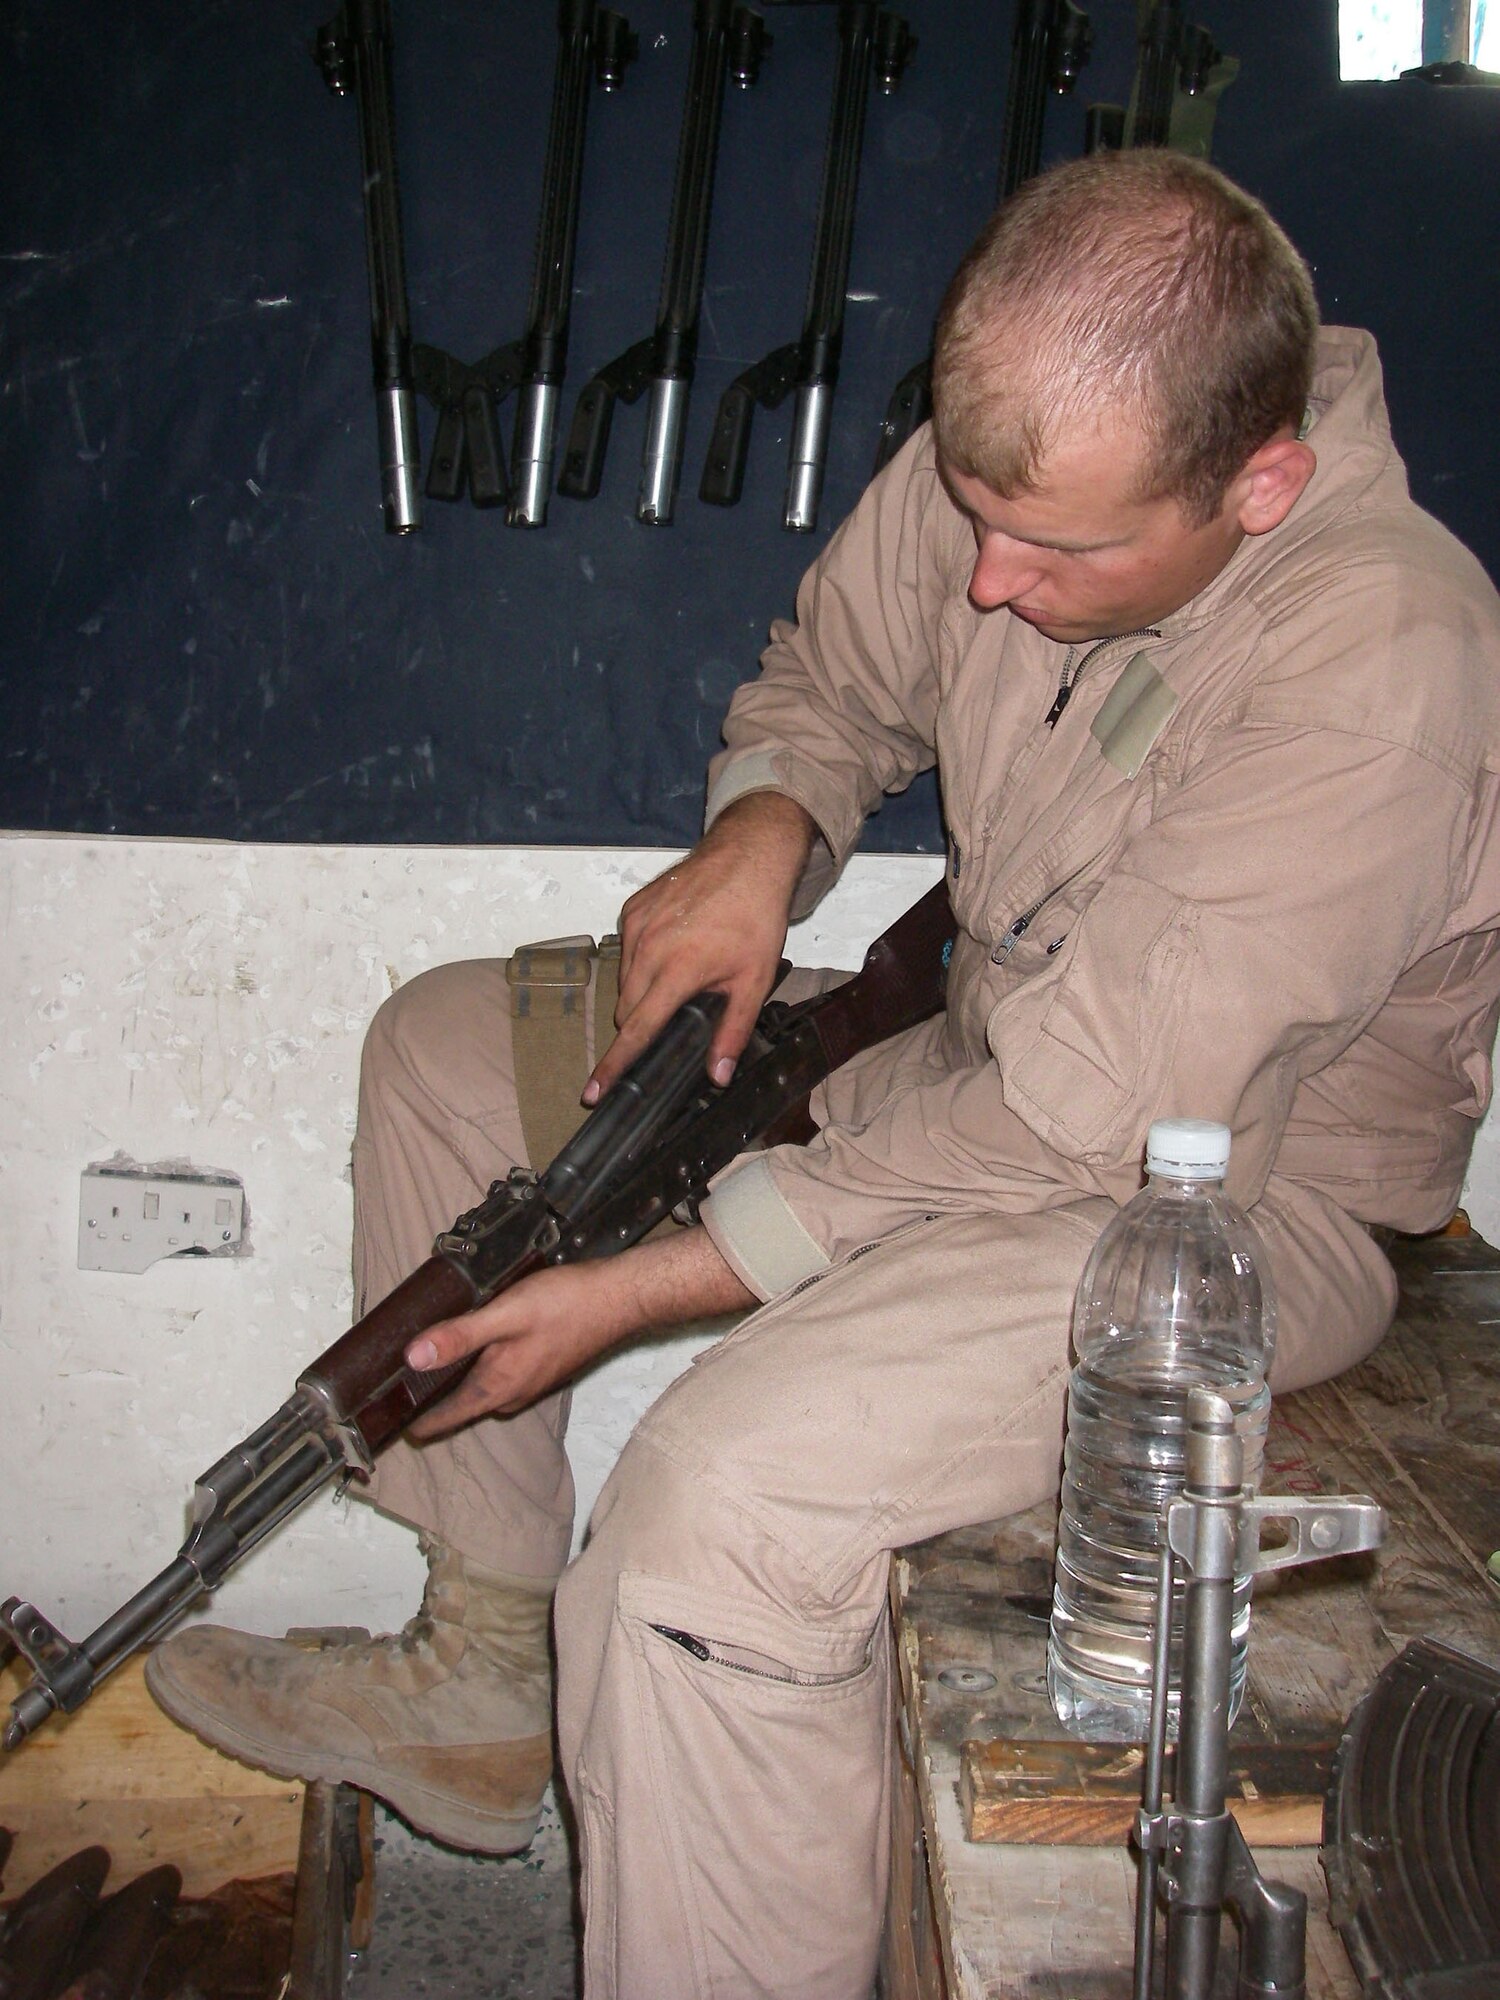 Senior Airman John Soules, 741st Missile Security Forces Squadron member, inspects an AK-47, a gas operated assault rifle created by the Soviet Union, during his daily detail at an Iraqi police station in Baghdad in early June. Airman Soules was presented the Purple Heart and Air Force Combat Action Medal for wounds received in action June 28, 2007. He volunteered for the 365-day deployment to support Operation Iraqi Freedom. (U.S. Air Force photo) 